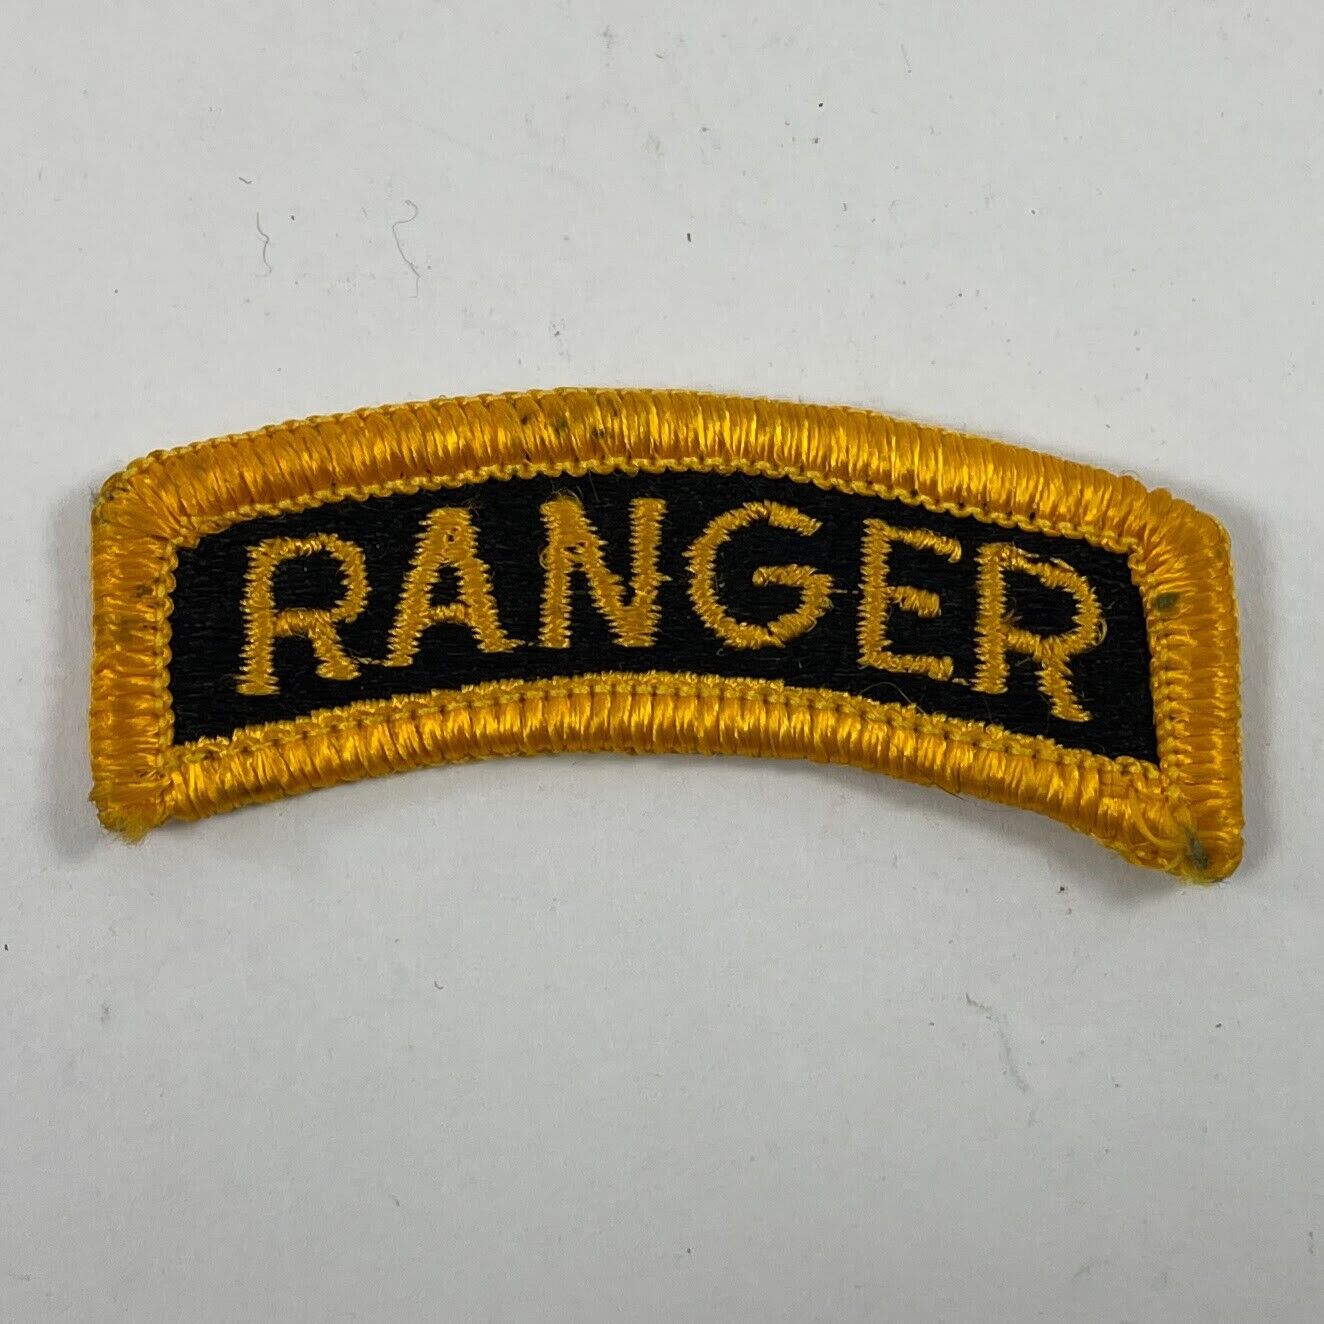 U.S. ARMY Ranger MILITARY EMBROIDERED PATCH YELLOW ON BLACK 2.25